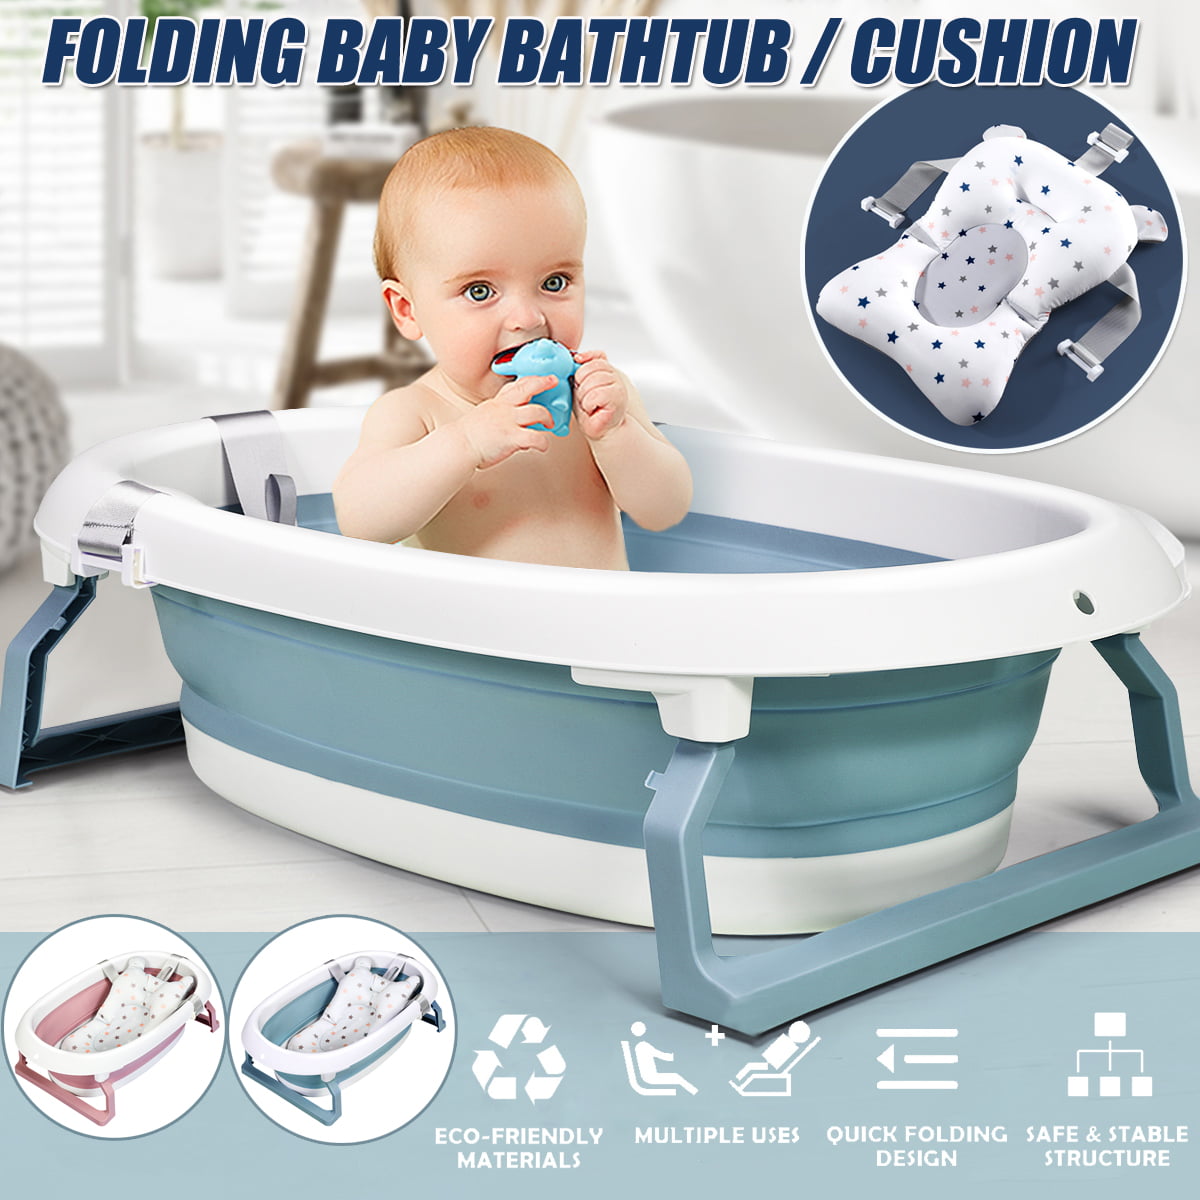 Blue Safety Adjustable Safety Shower Mat Save Space and Easy to Clean,Infant Bath Tub with Comfortable Bath Seat Support Sponge Baby Bathtub Portable Collapsible Toddler Bath tub 0-5 Years Old 